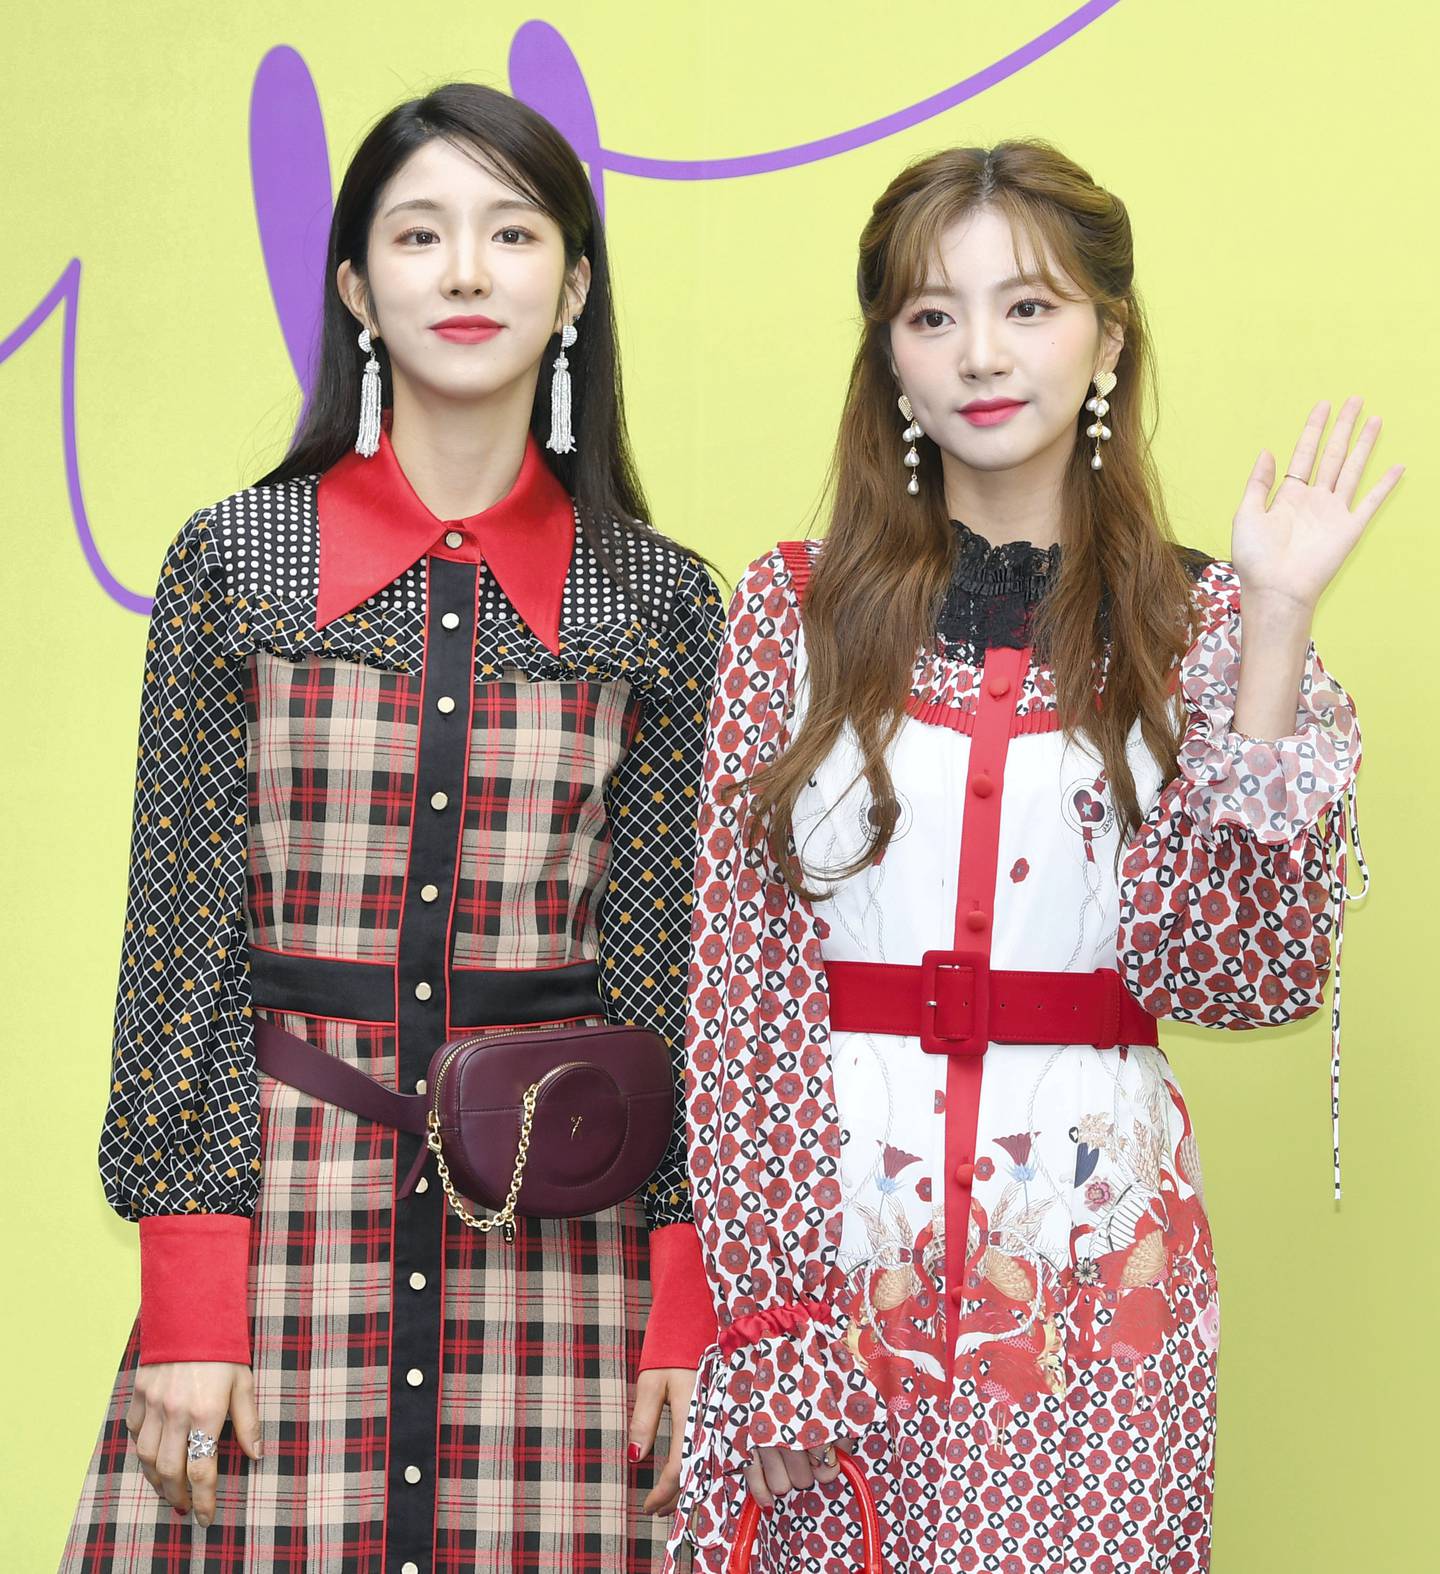 SEOUL, SOUTH KOREA - OCTOBER 17 : Laboum show cases designs by Doucan during the Seoul Fashion Week 2020 at Dongdaemun Design Plaza on October 17, 2019 in Seoul, South Korea. (Photo by The Chosunilbo JNS/Imazins via Getty Images)